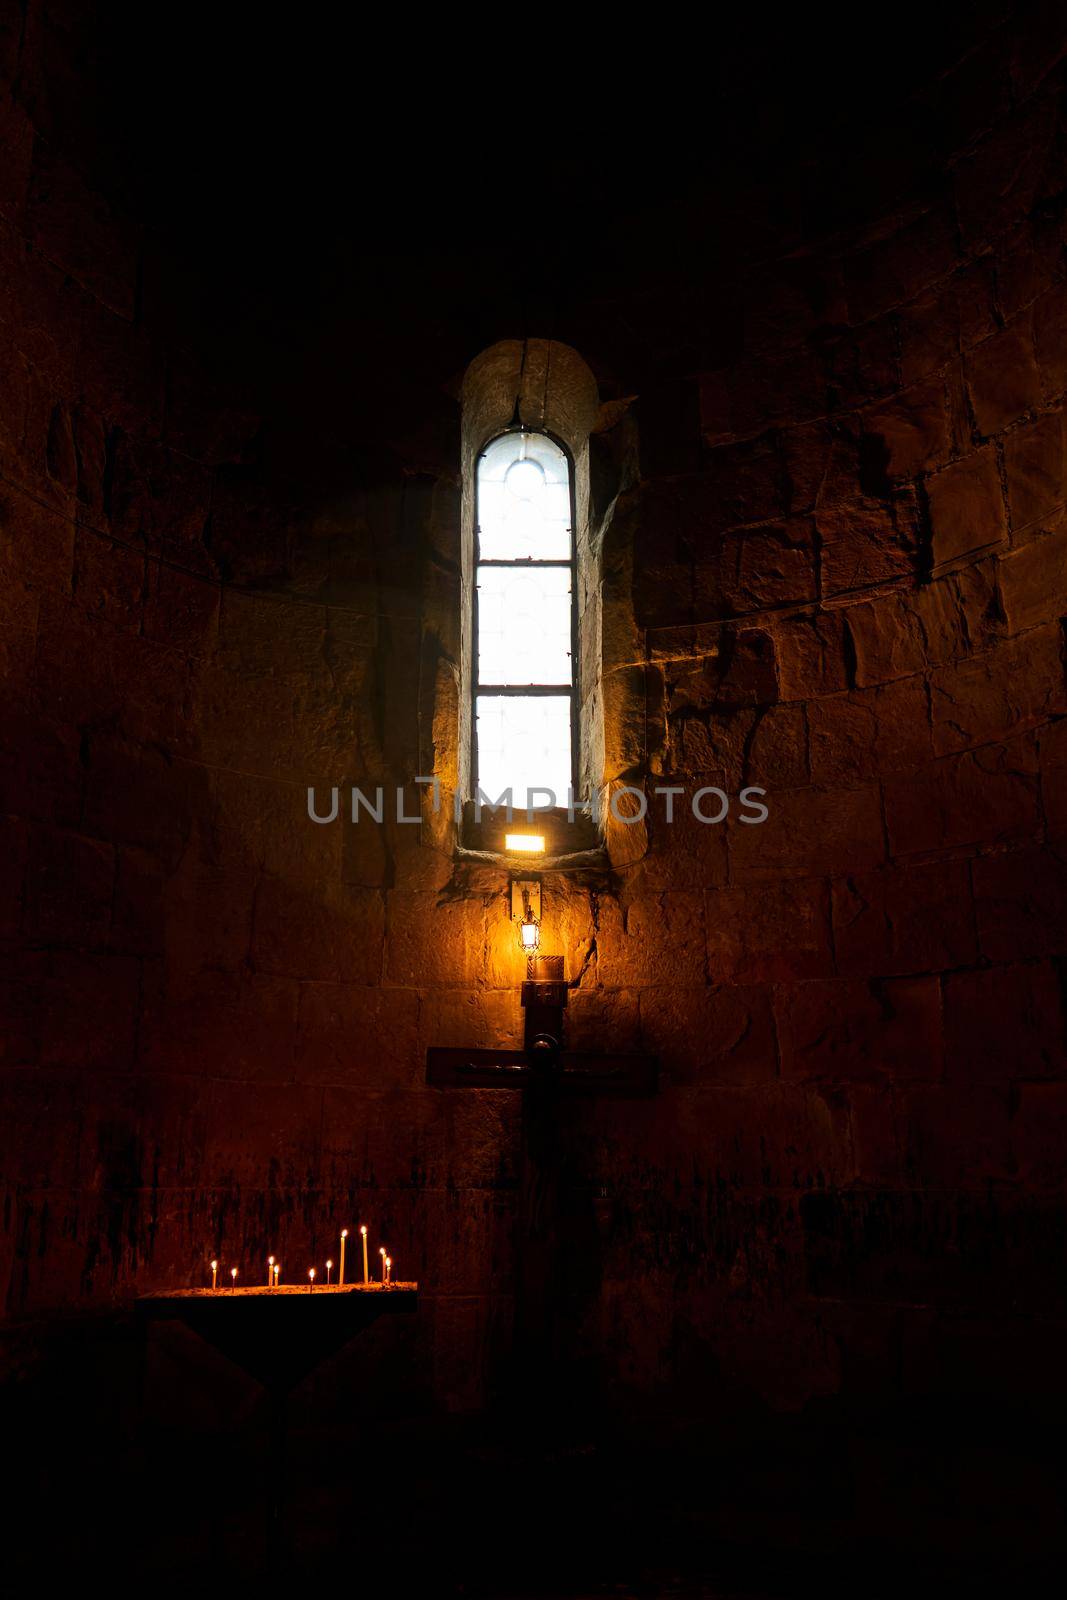 Dark temple with small windows and burning candles.